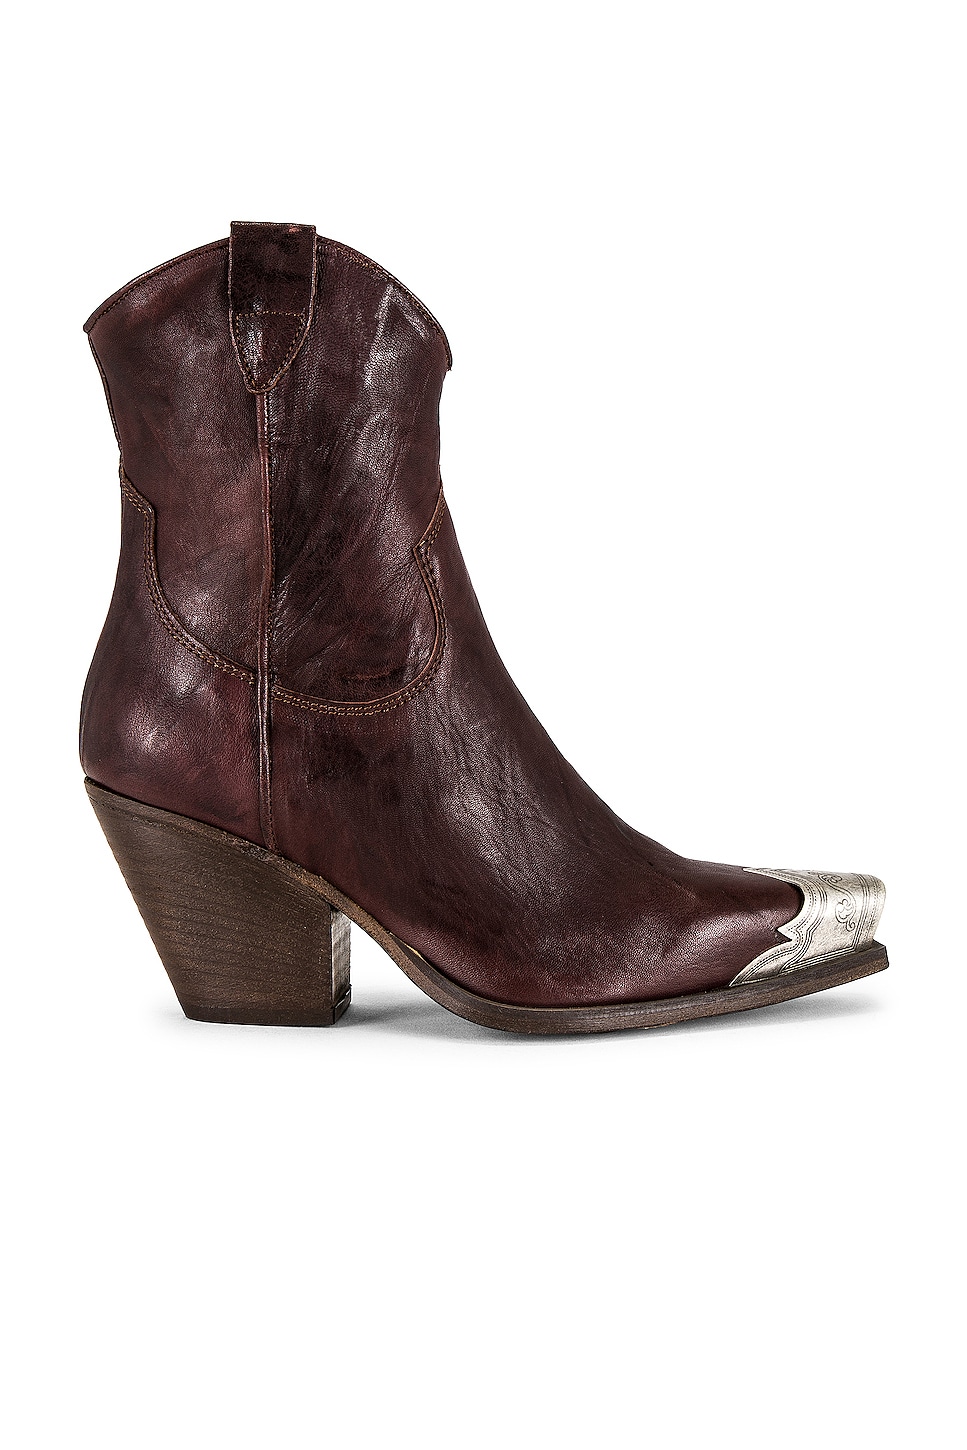 Free People, Shoes, Free People Brayden Western Boots